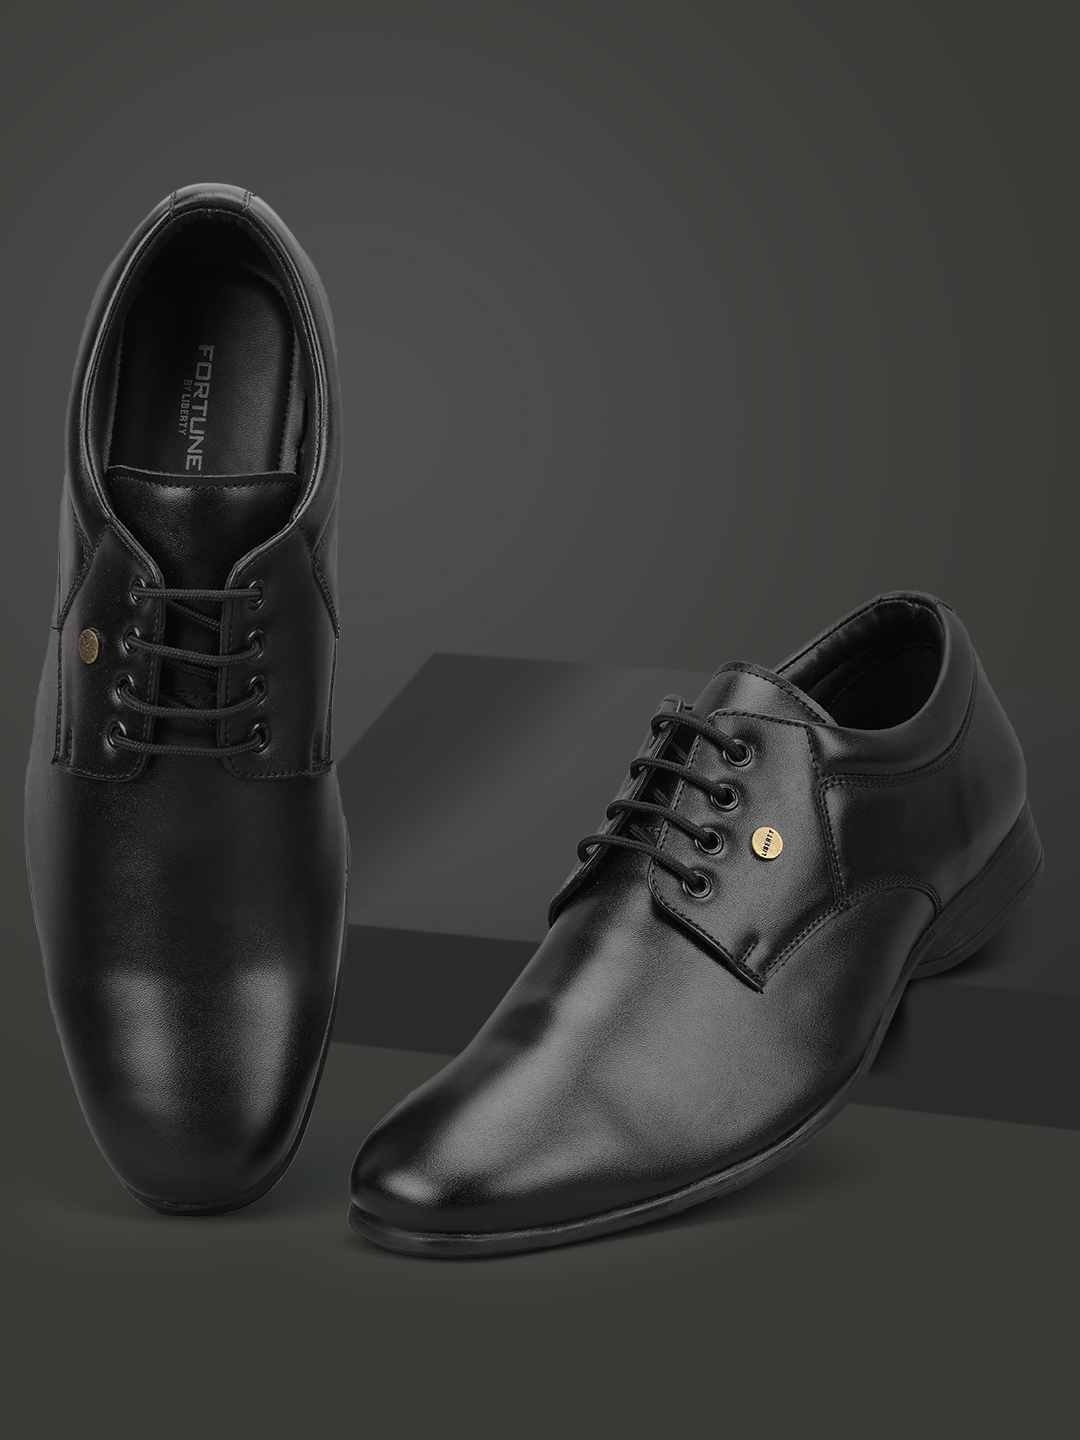 Liberty | Fortune by Liberty ROBERT-2 Black Formal Shoes for Men